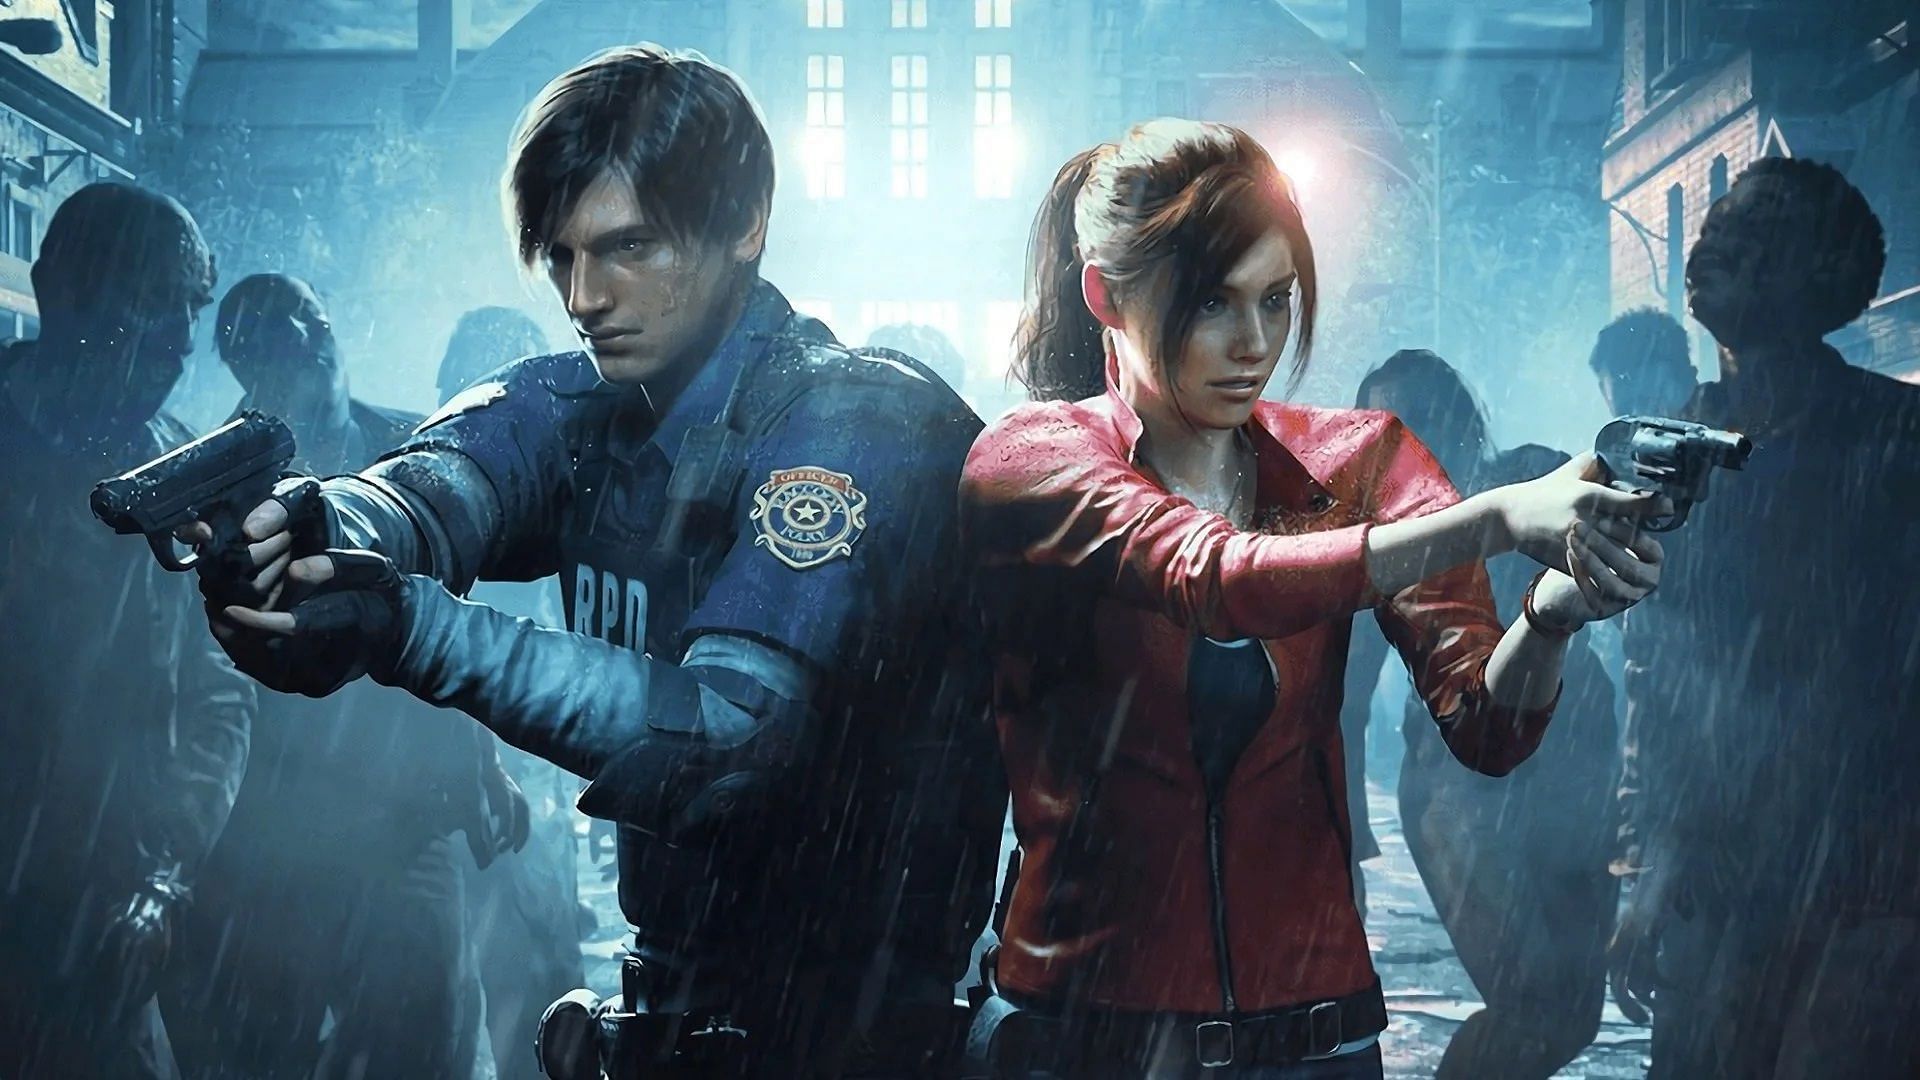 Work on a new Resident Evil game could be underway (Image via Capcom)